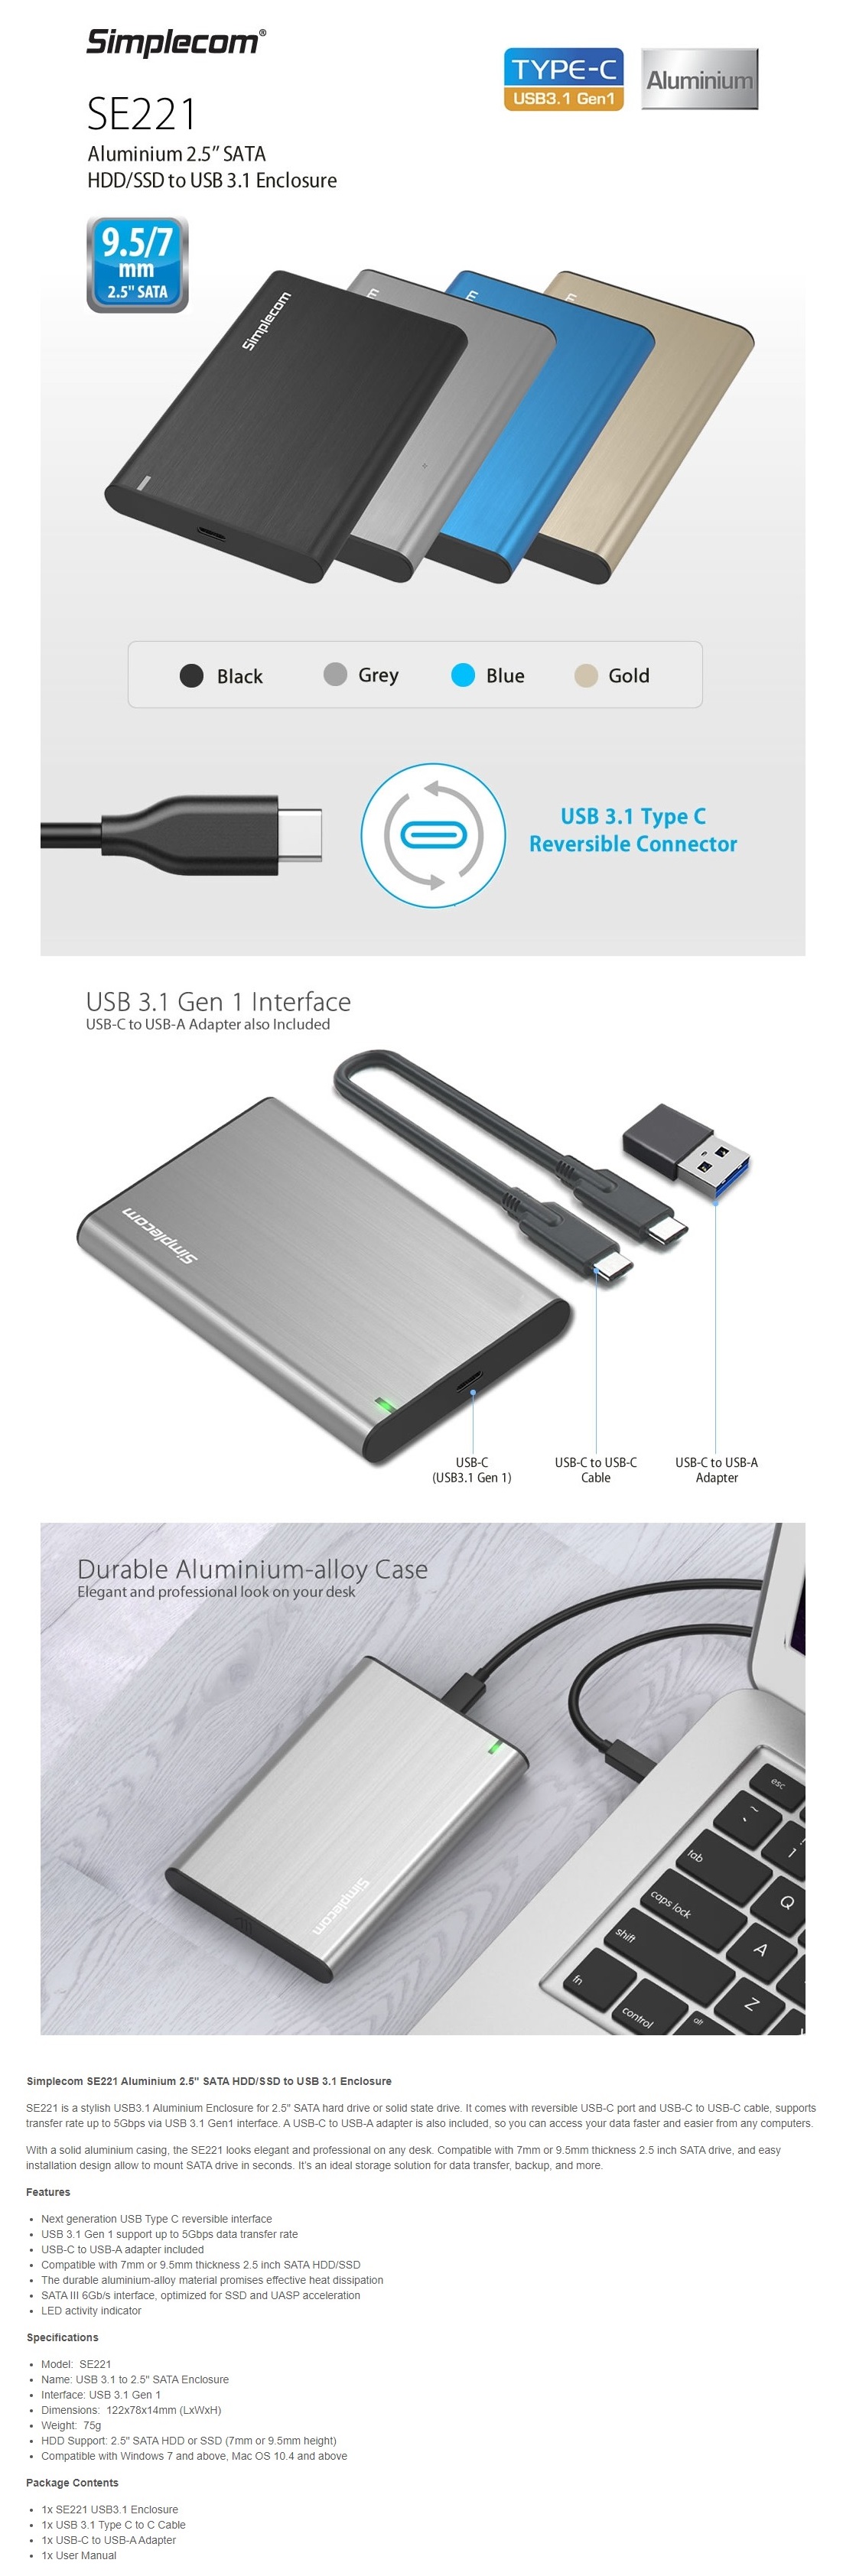 A large marketing image providing additional information about the product Simplecom SE221 Aluminium 2.5" SATA HDD/SSD USB3.1 Enclosure - Gold - Additional alt info not provided